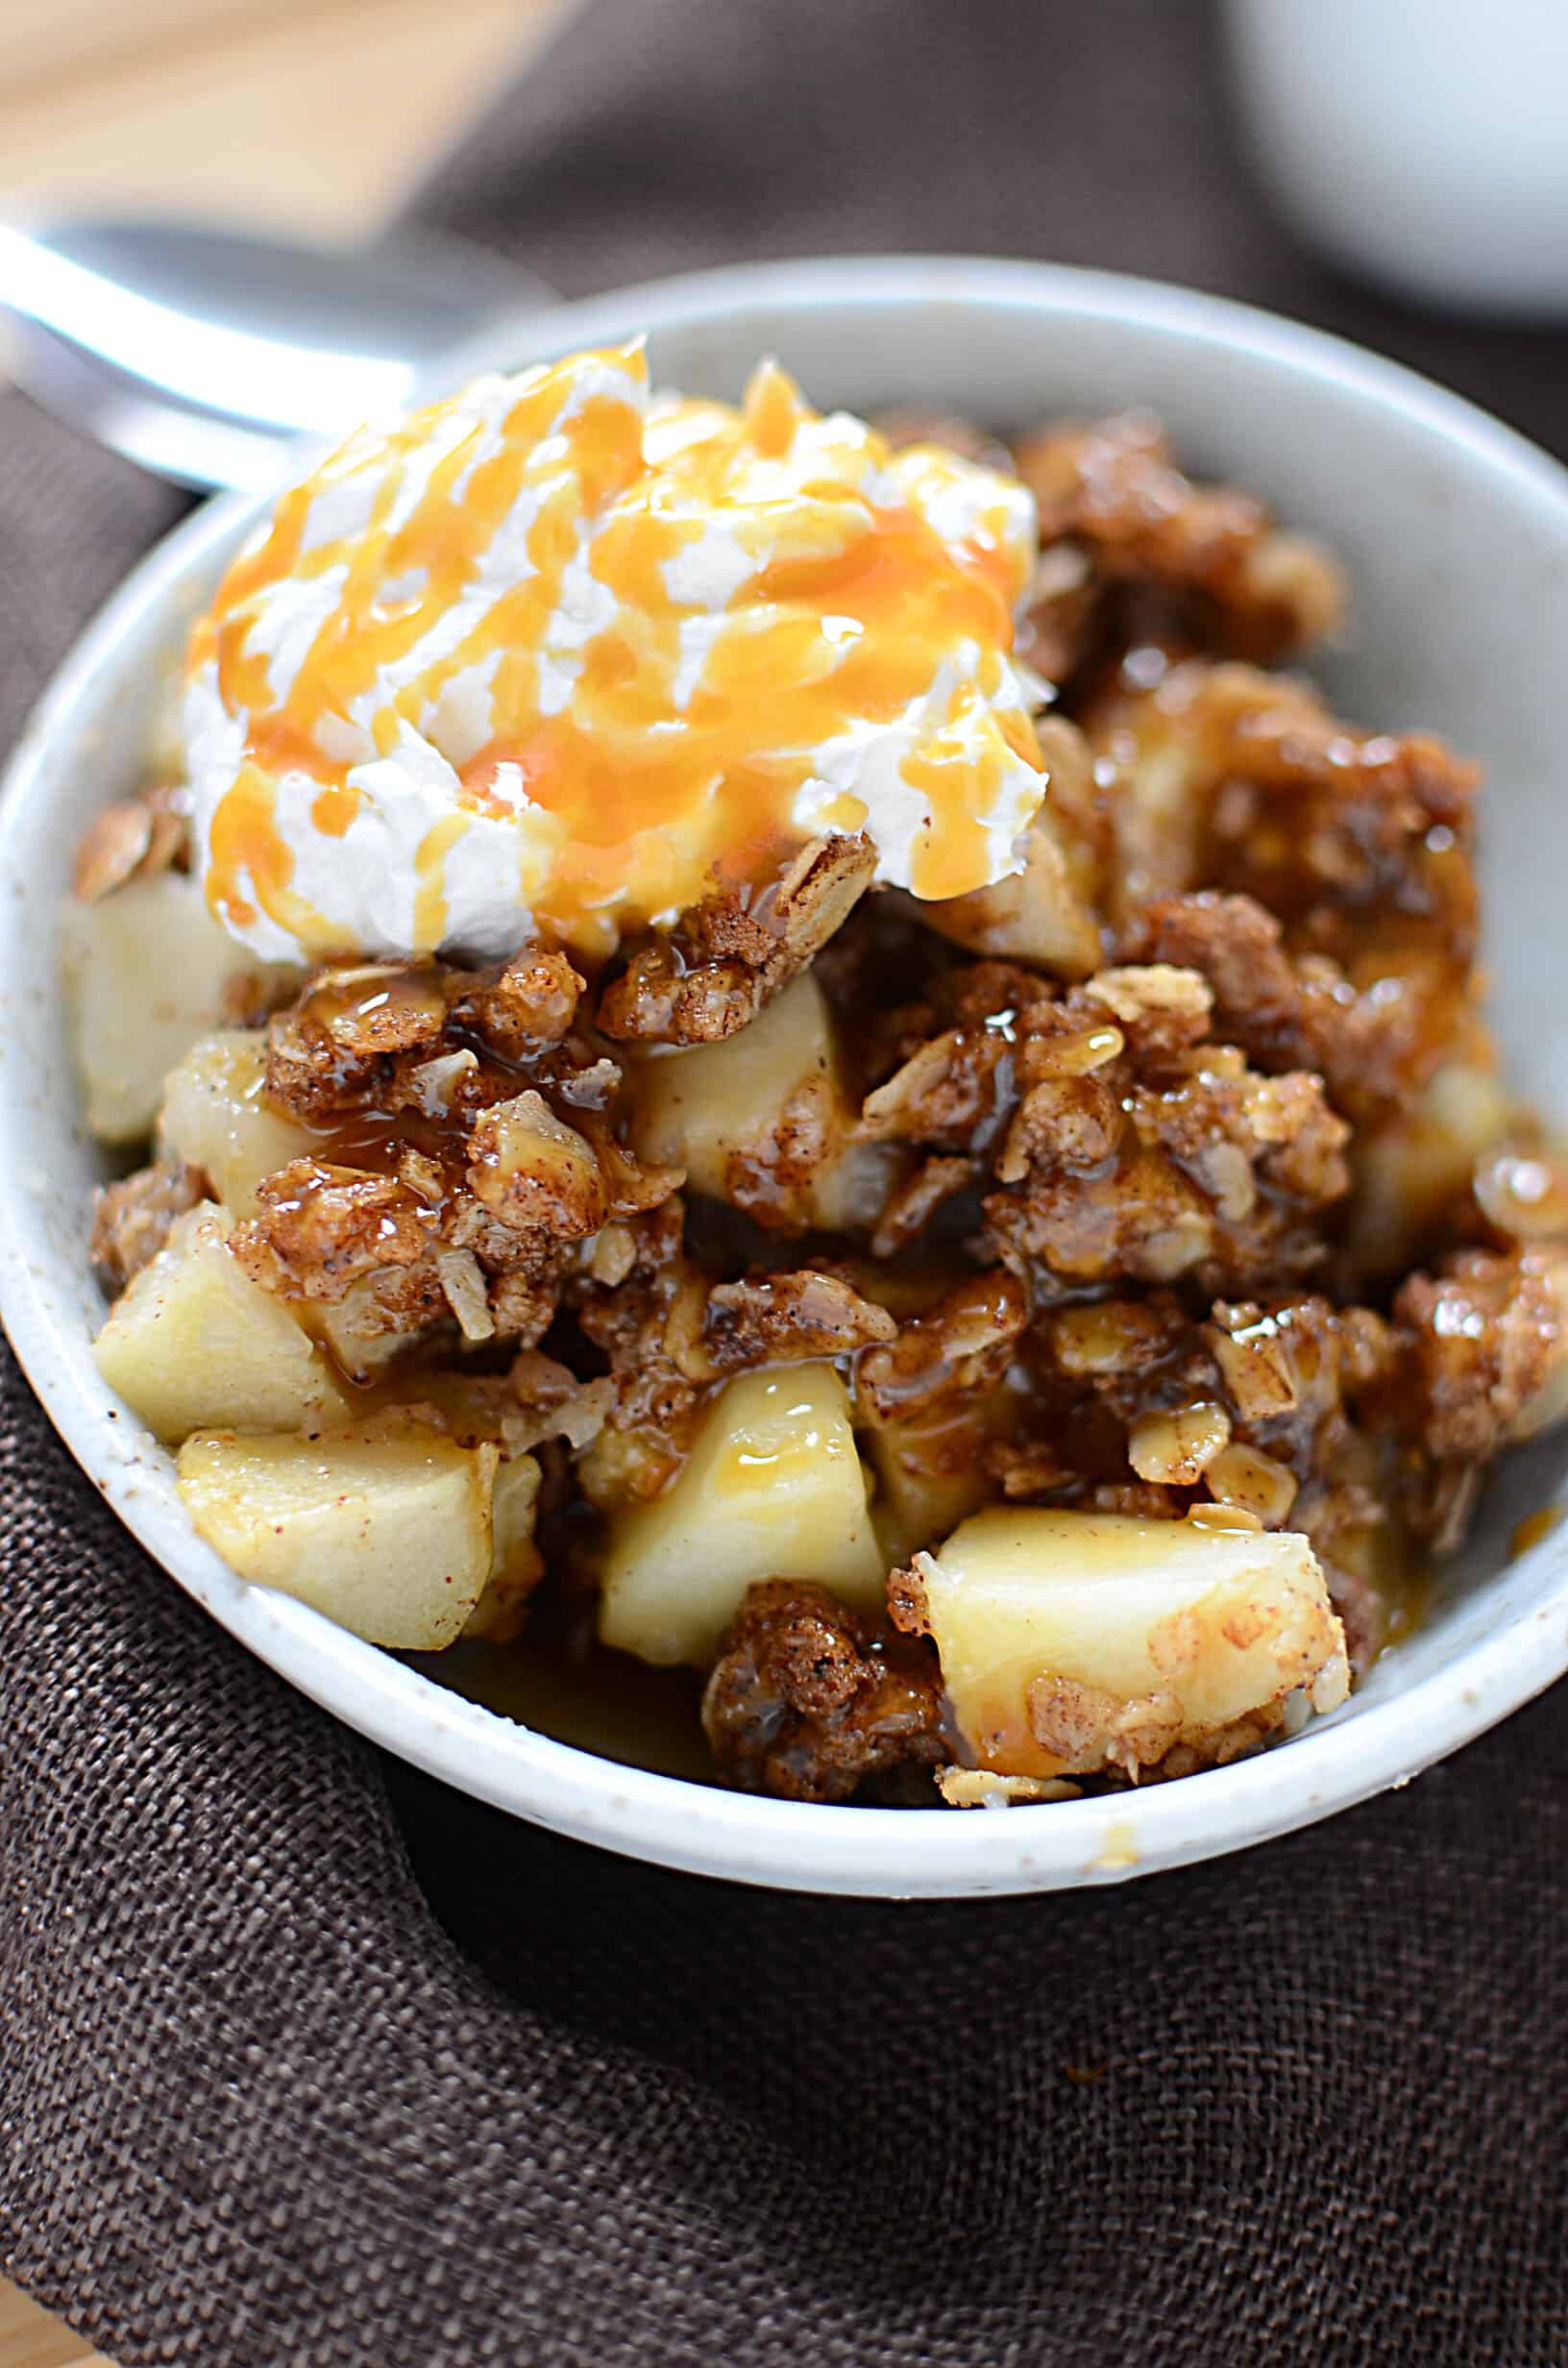 Spiced apple crisp with caramel drizzled on top in a white bowl with whipped topping.